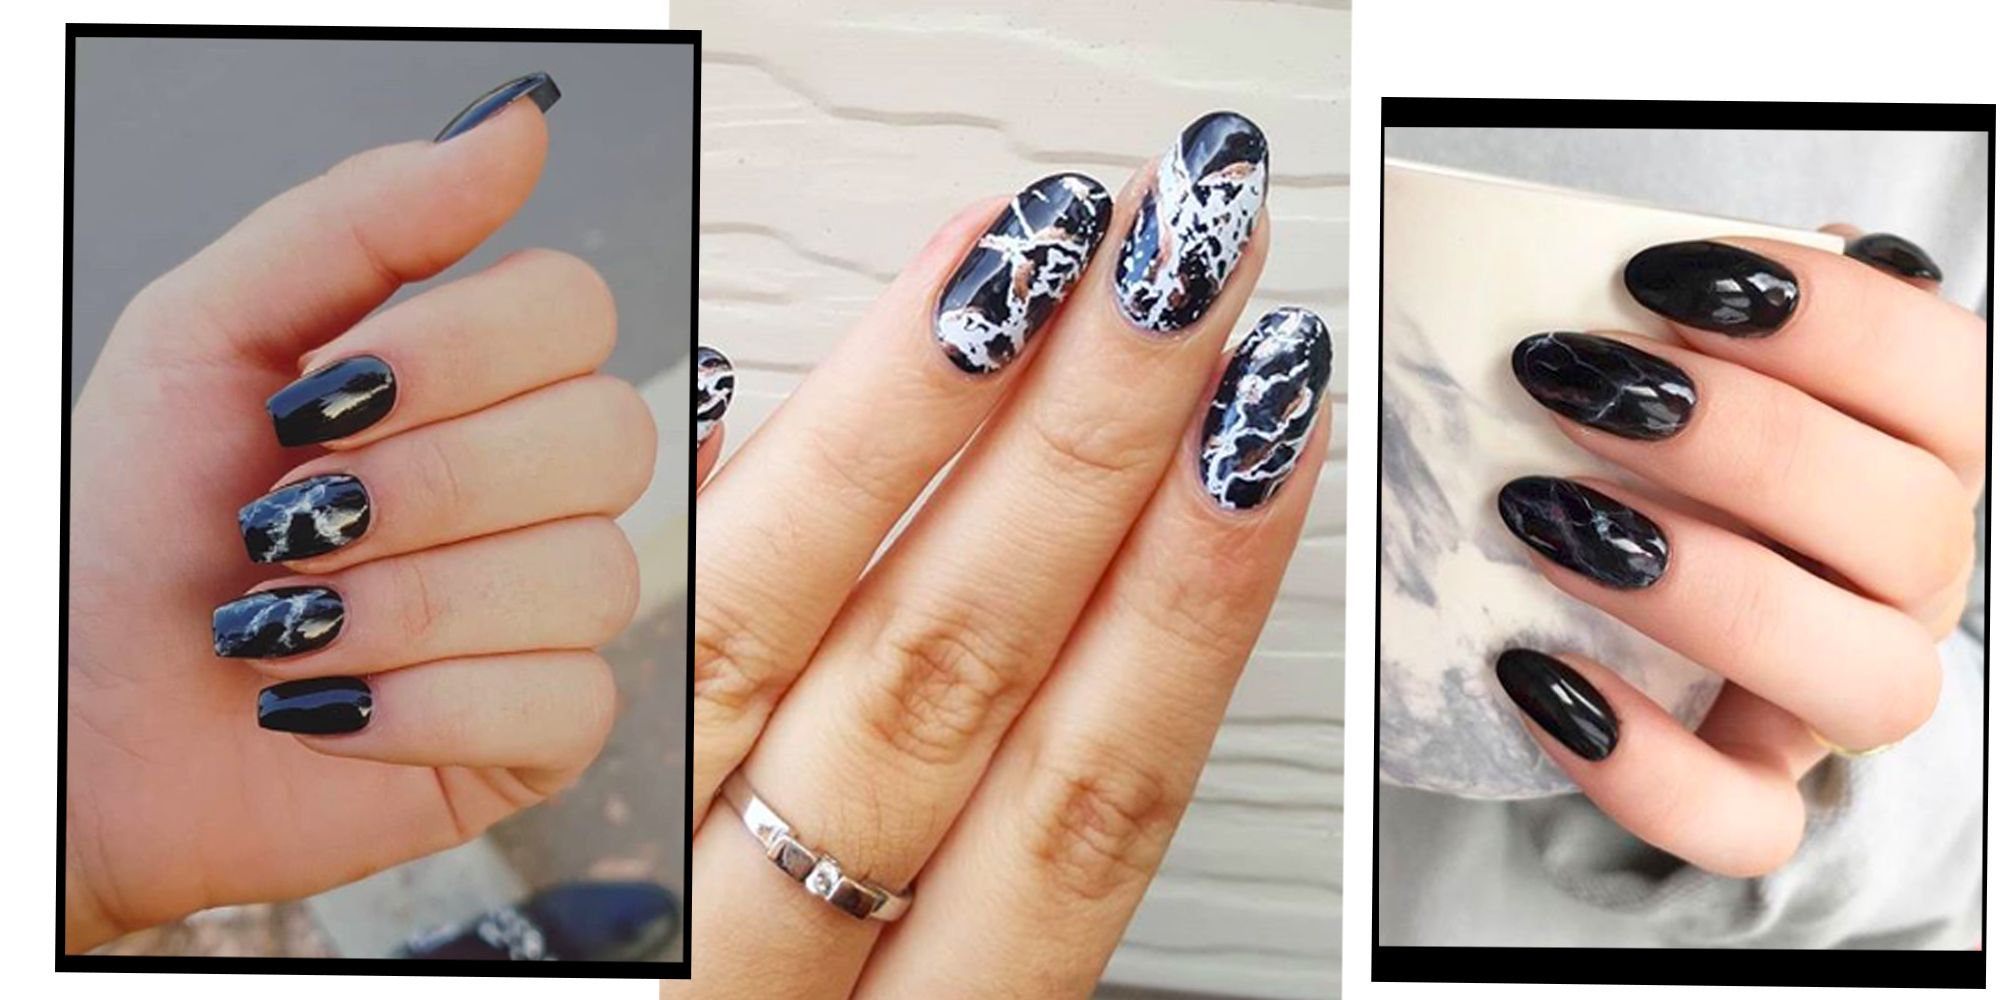 9. Solar Nail Art Designs with Marble - wide 3